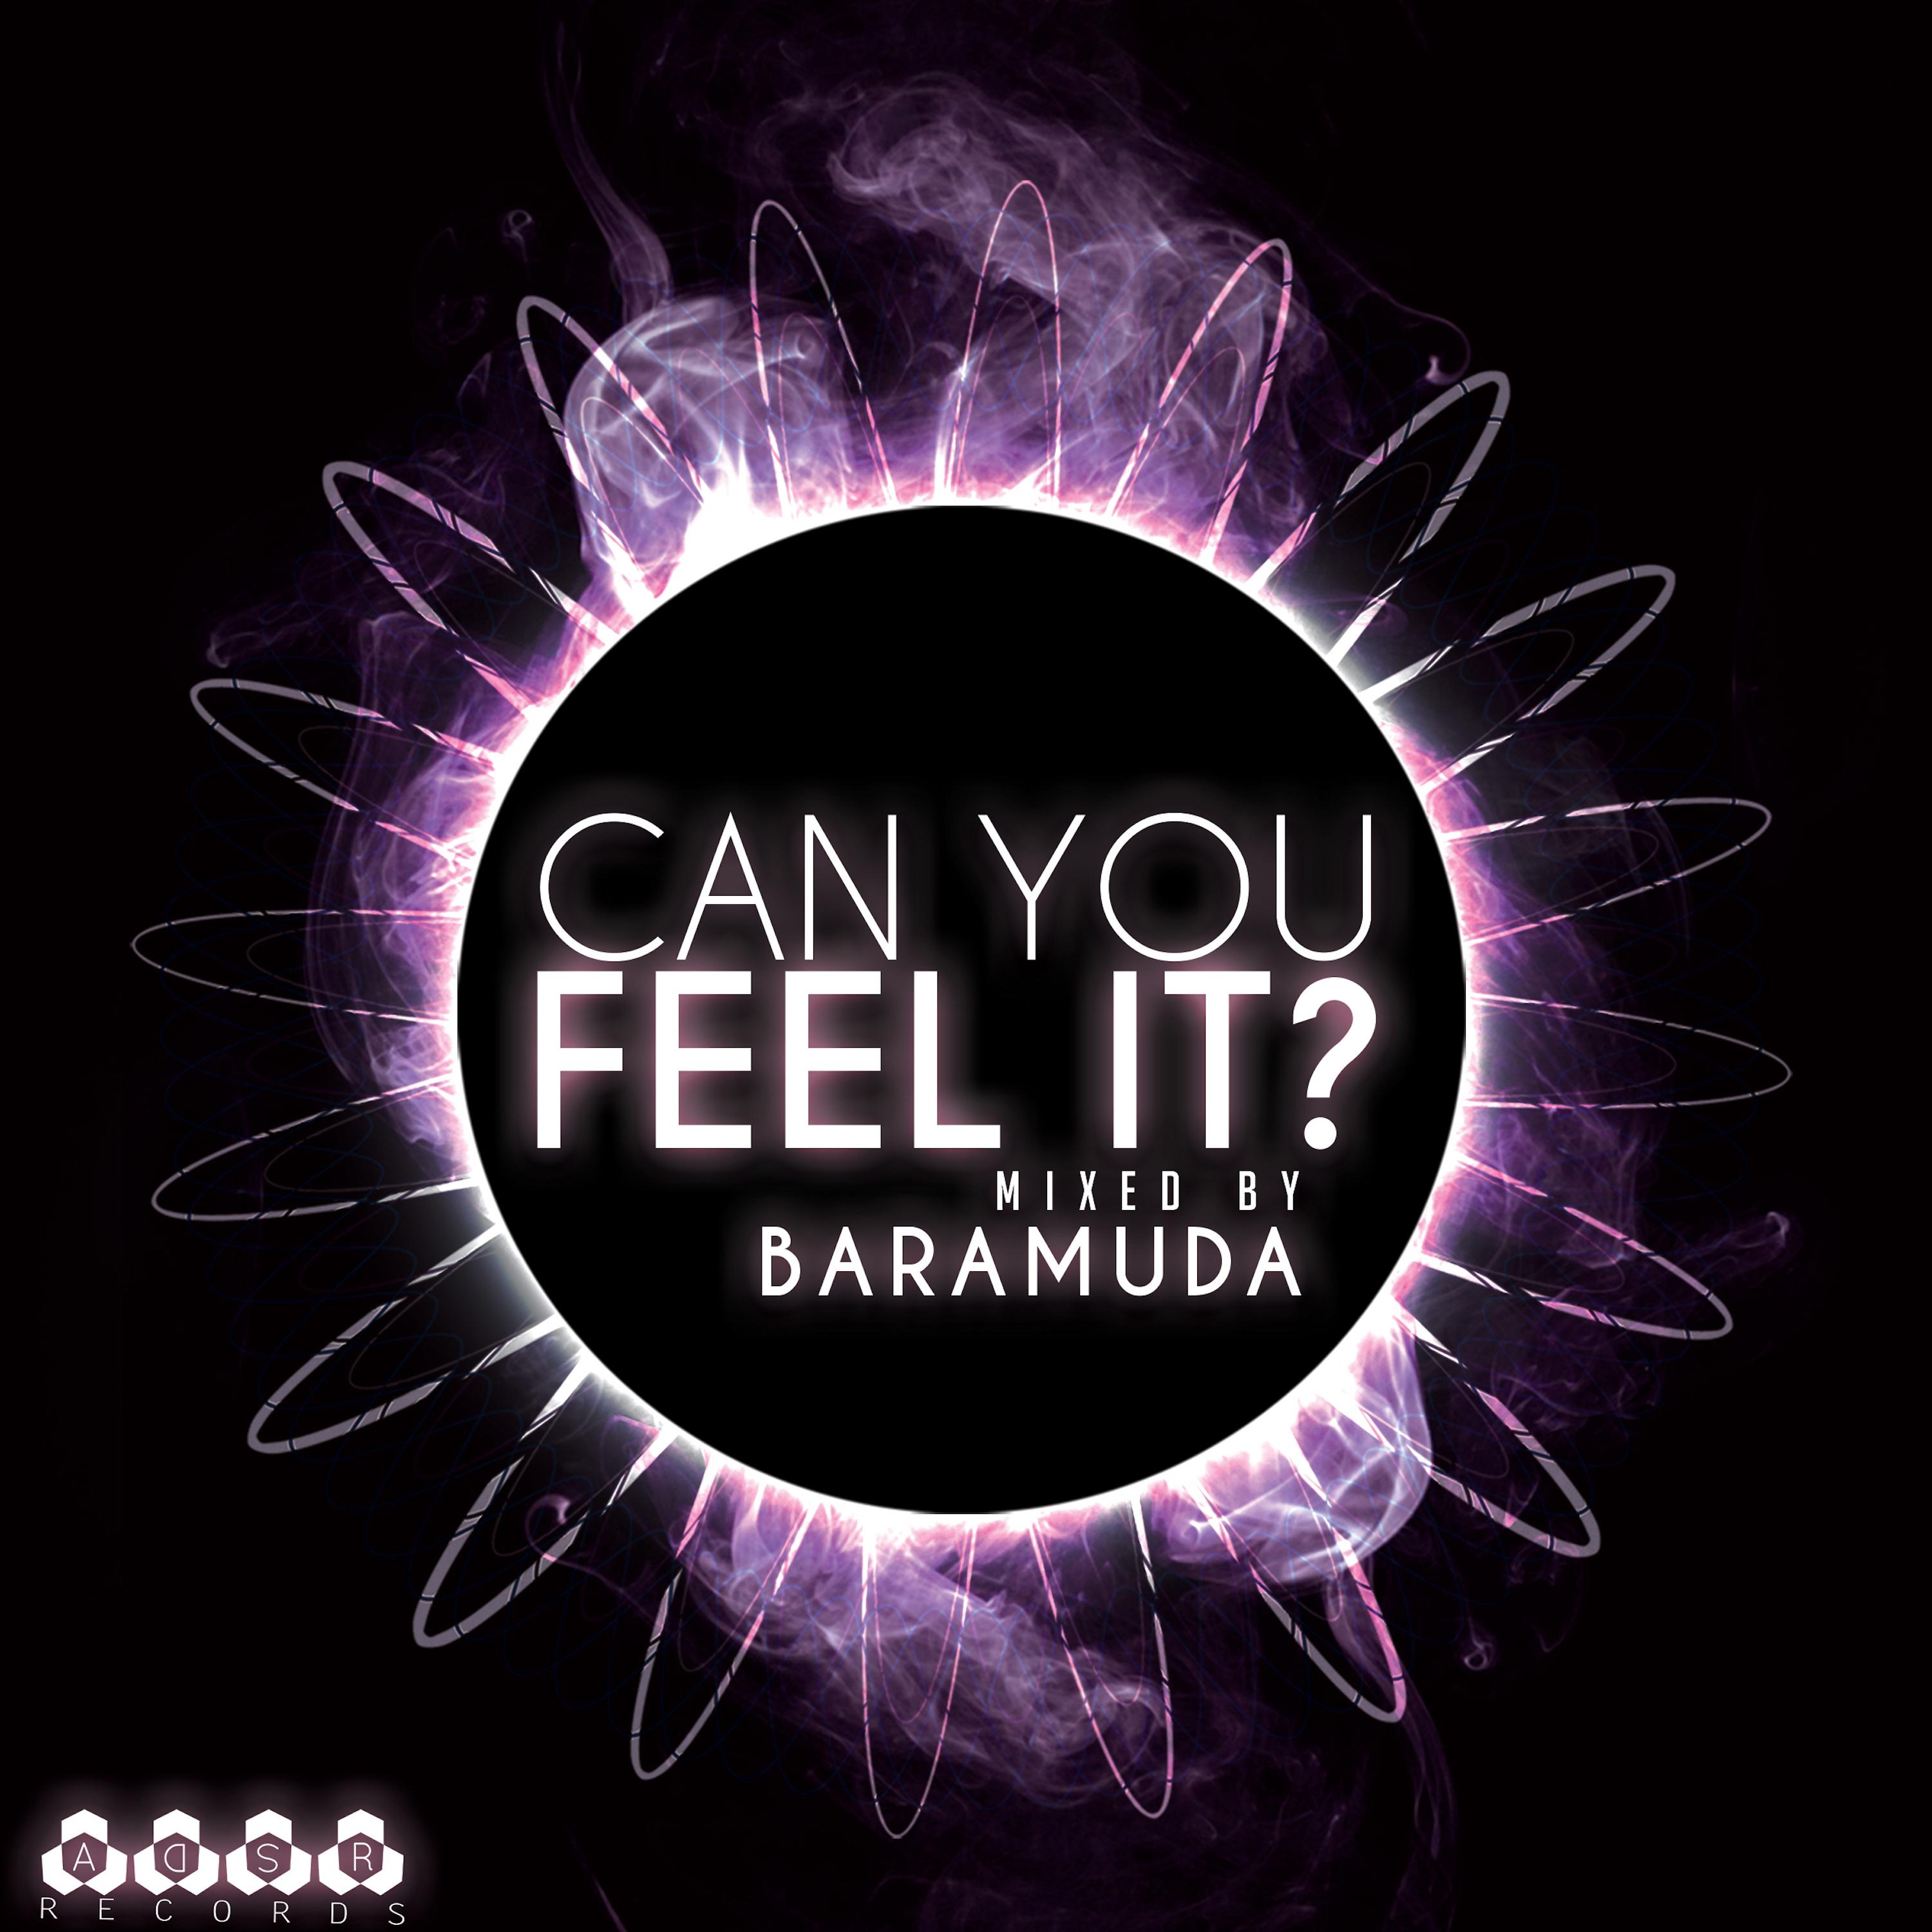 Can You Feel It? Mixed By Baramuda